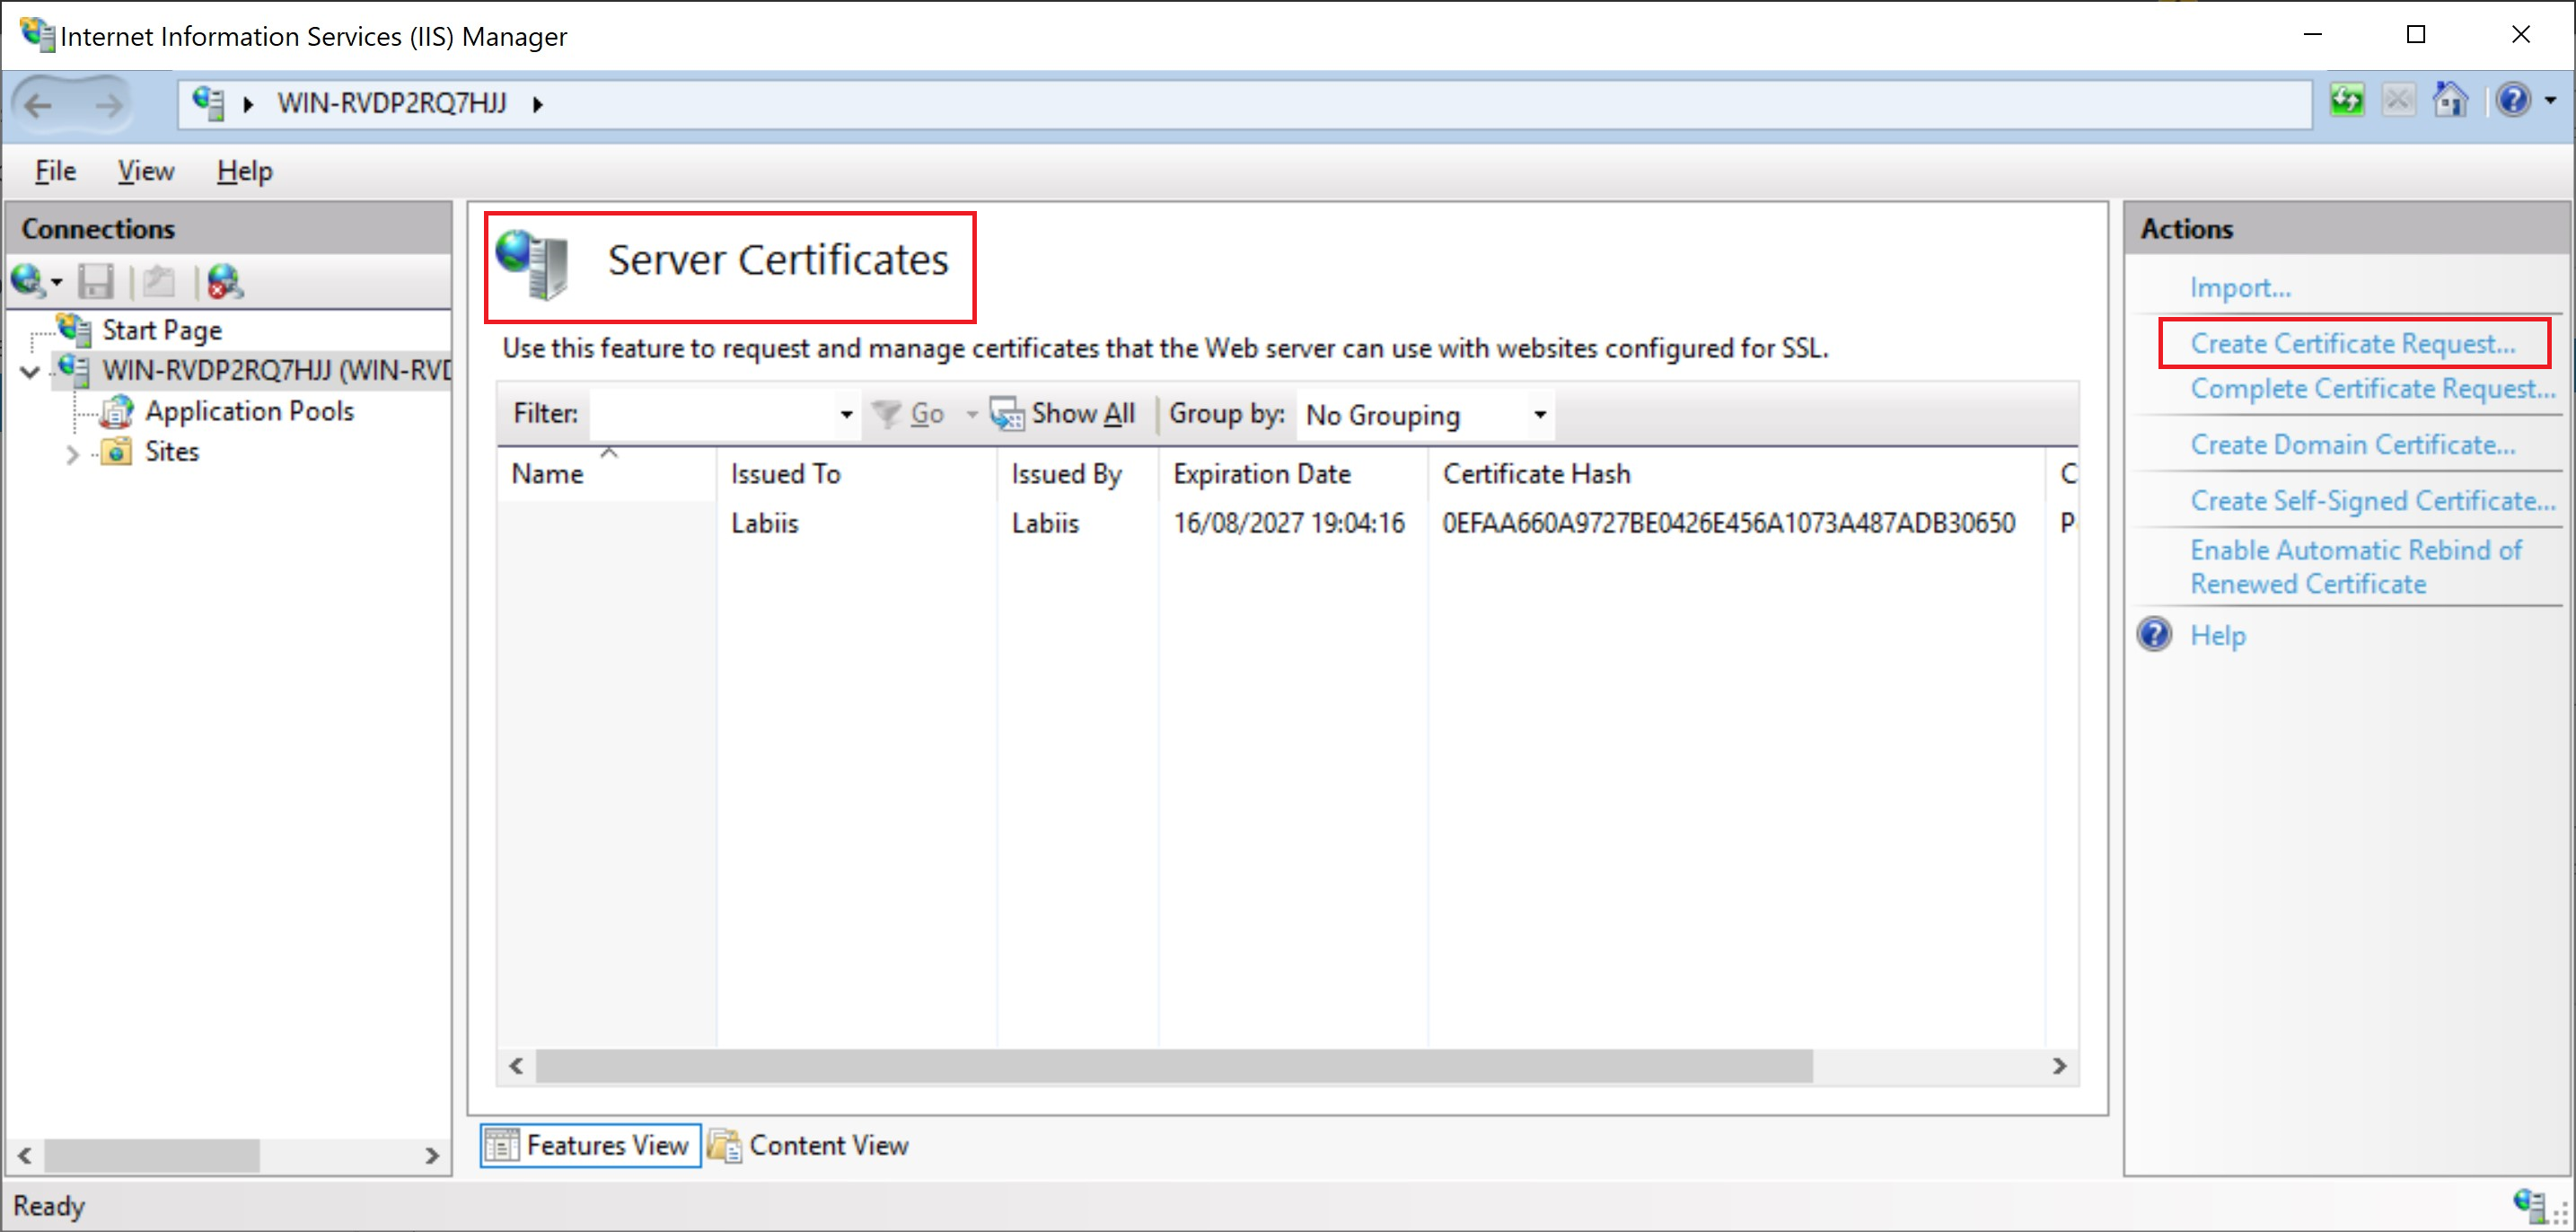 _IIS Manager_, certificate creation